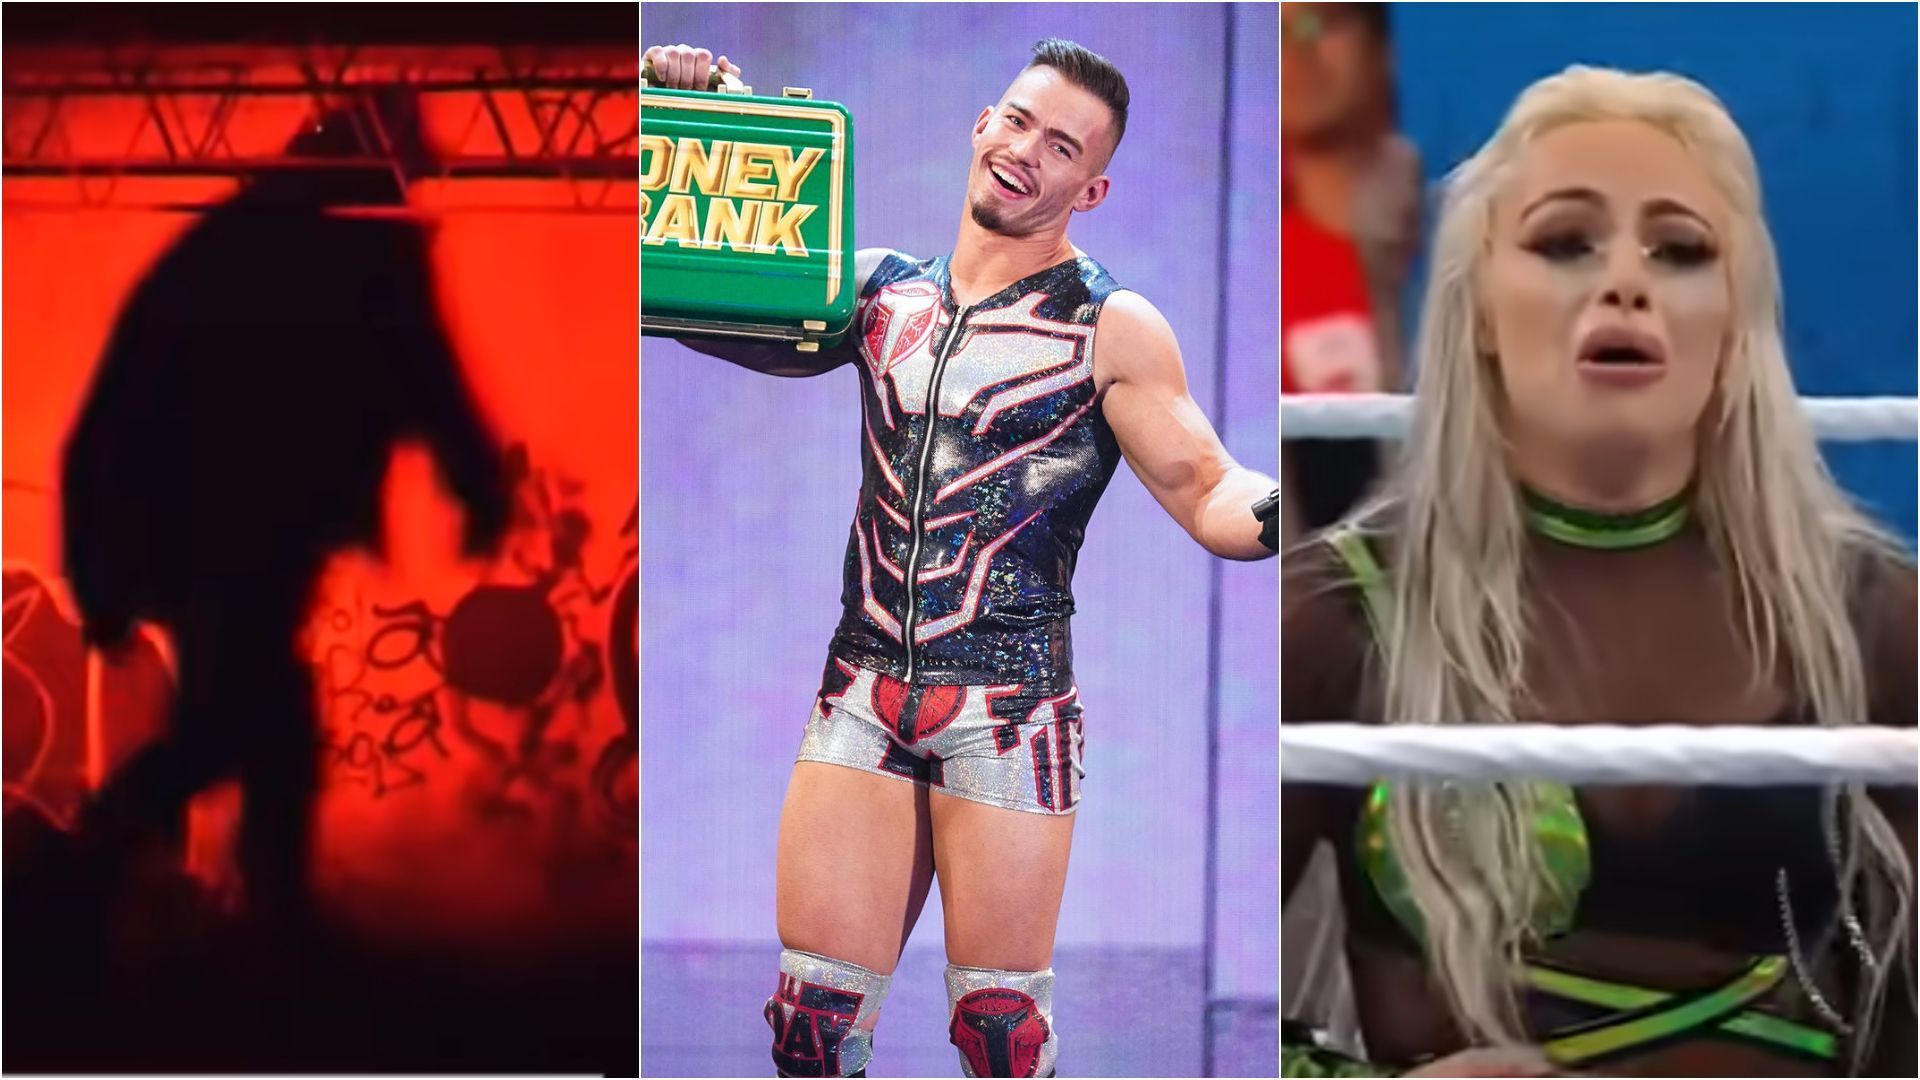 The WWE Universe&#039;s curiosity is piqued as we head for SummerSlam